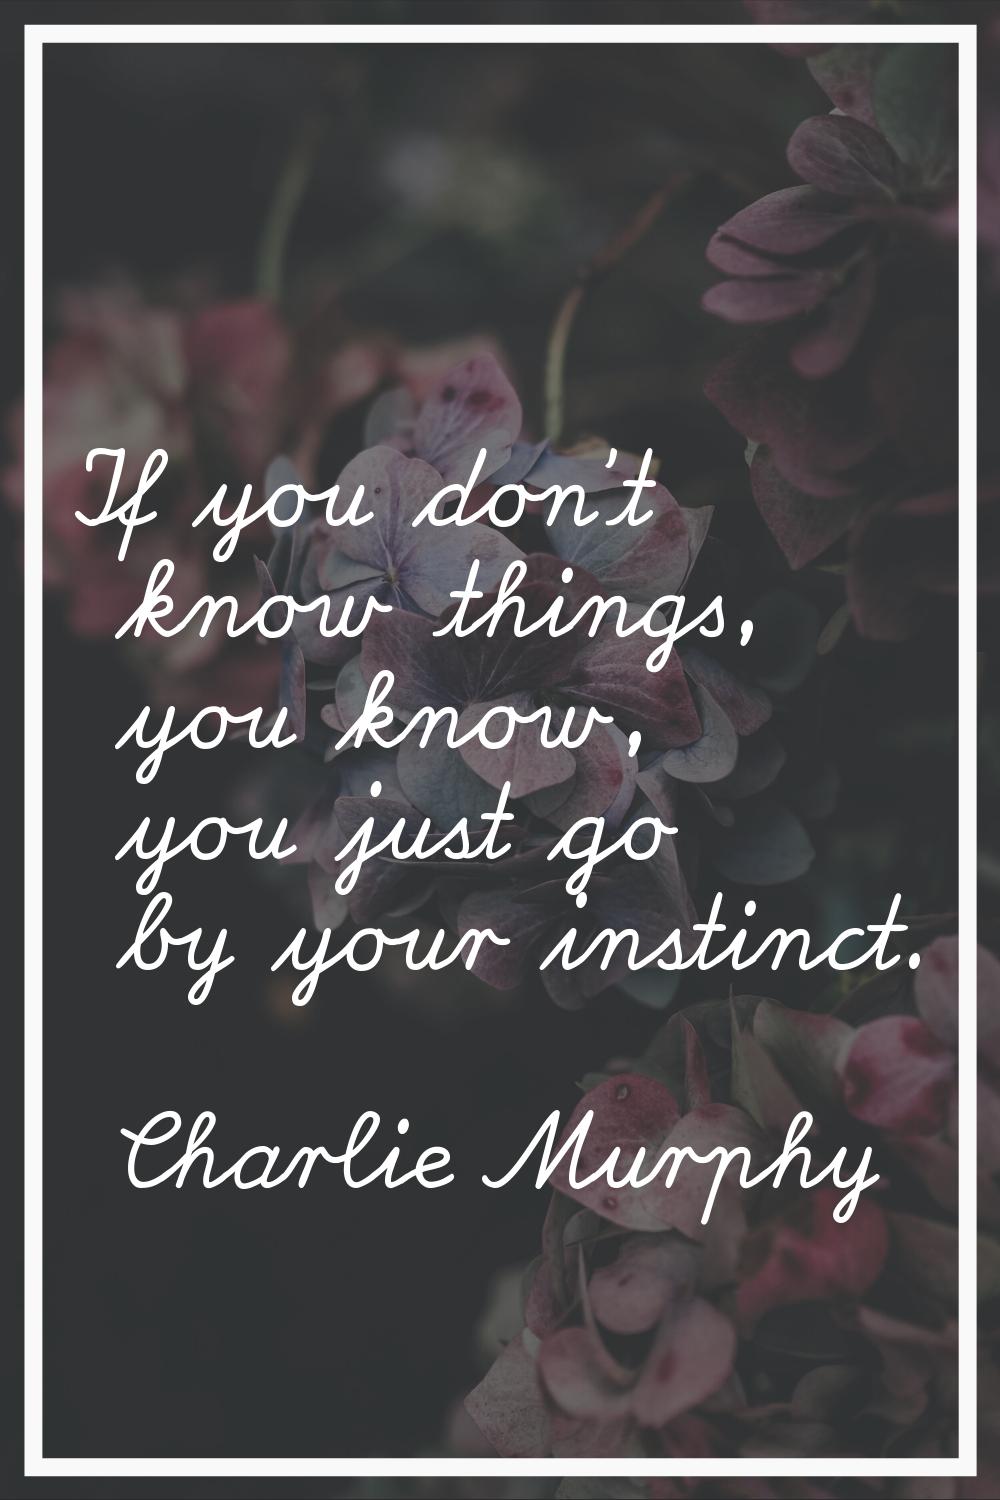 If you don't know things, you know, you just go by your instinct.